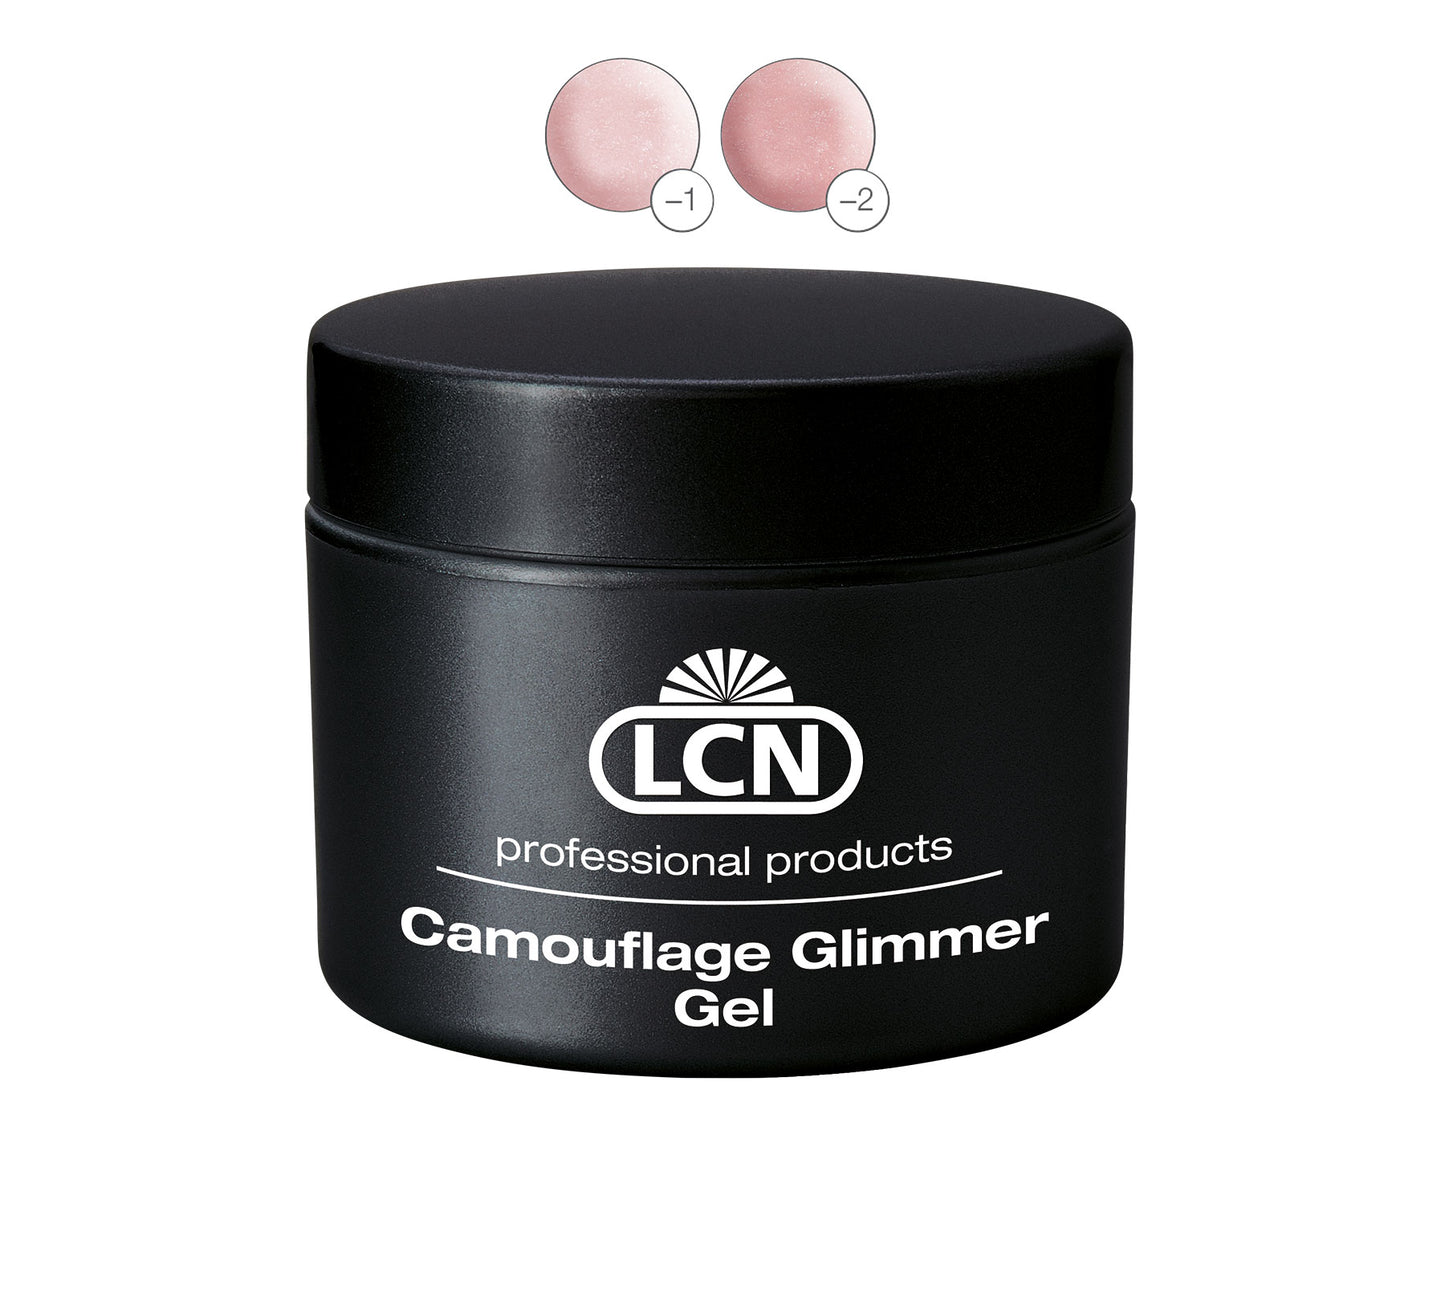 LCN Camouflage Glimmer, 2 Natural Nude, 5ml